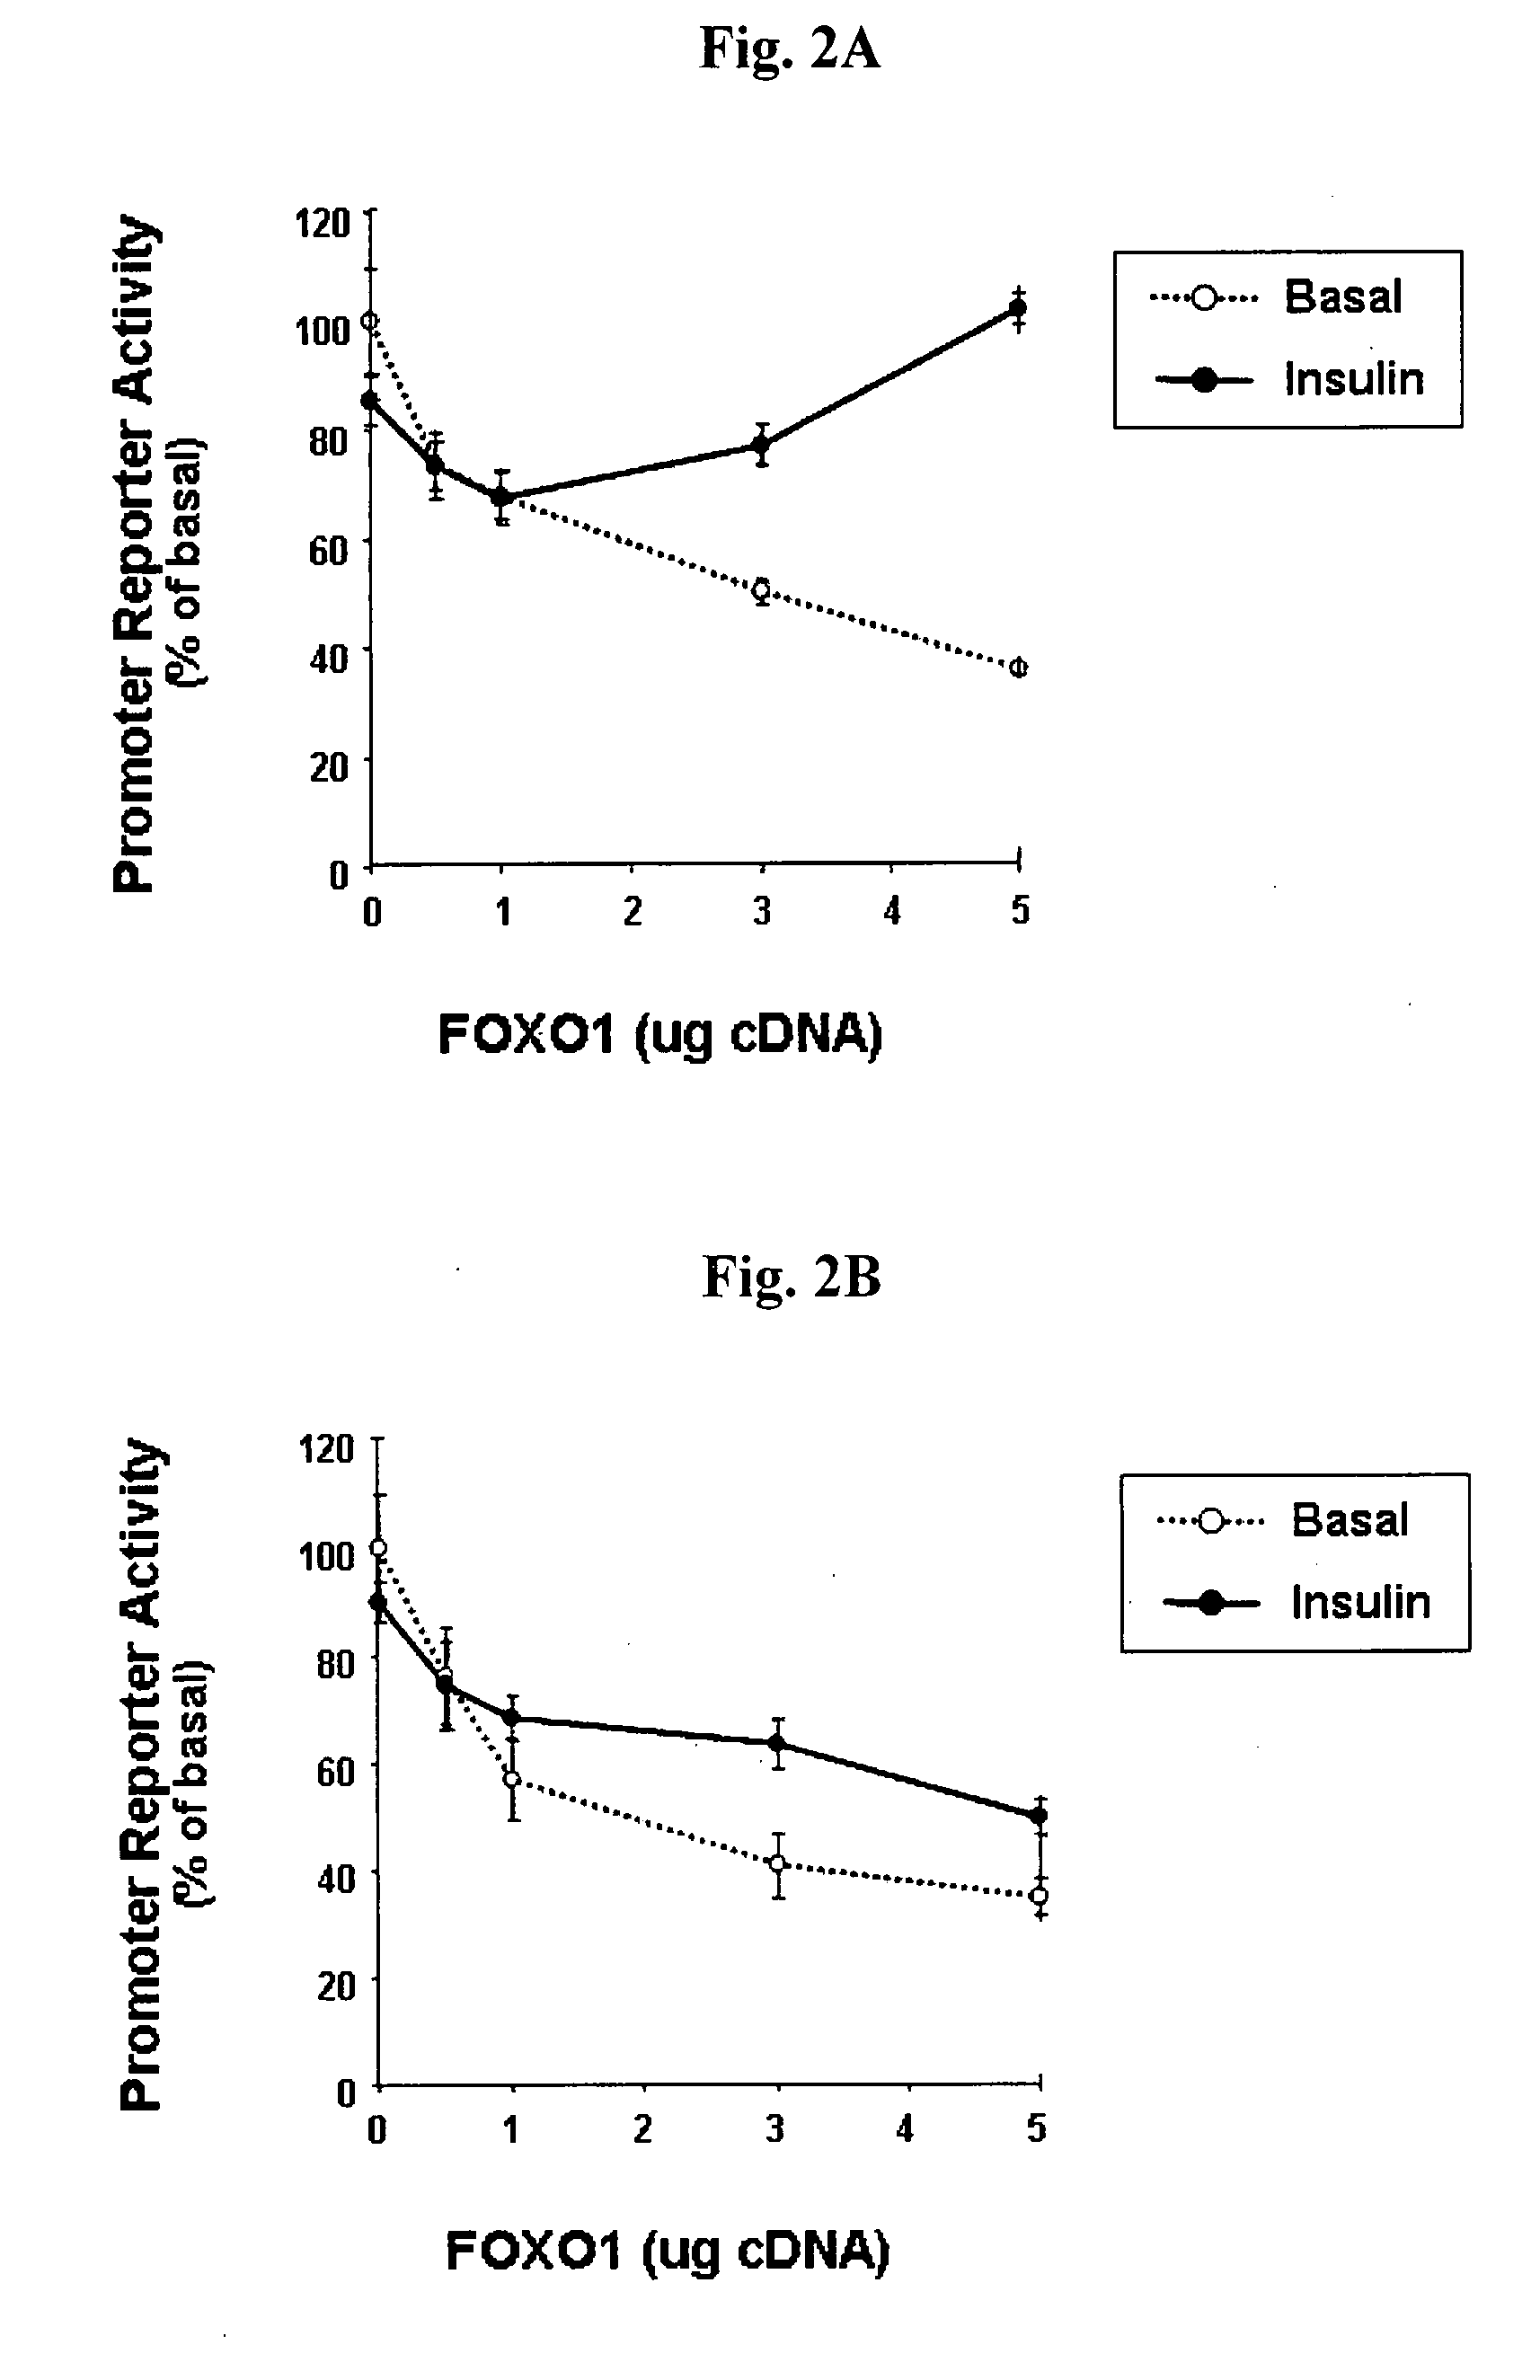 Modulation of PPARgamma2 gene promoter by FOXO1